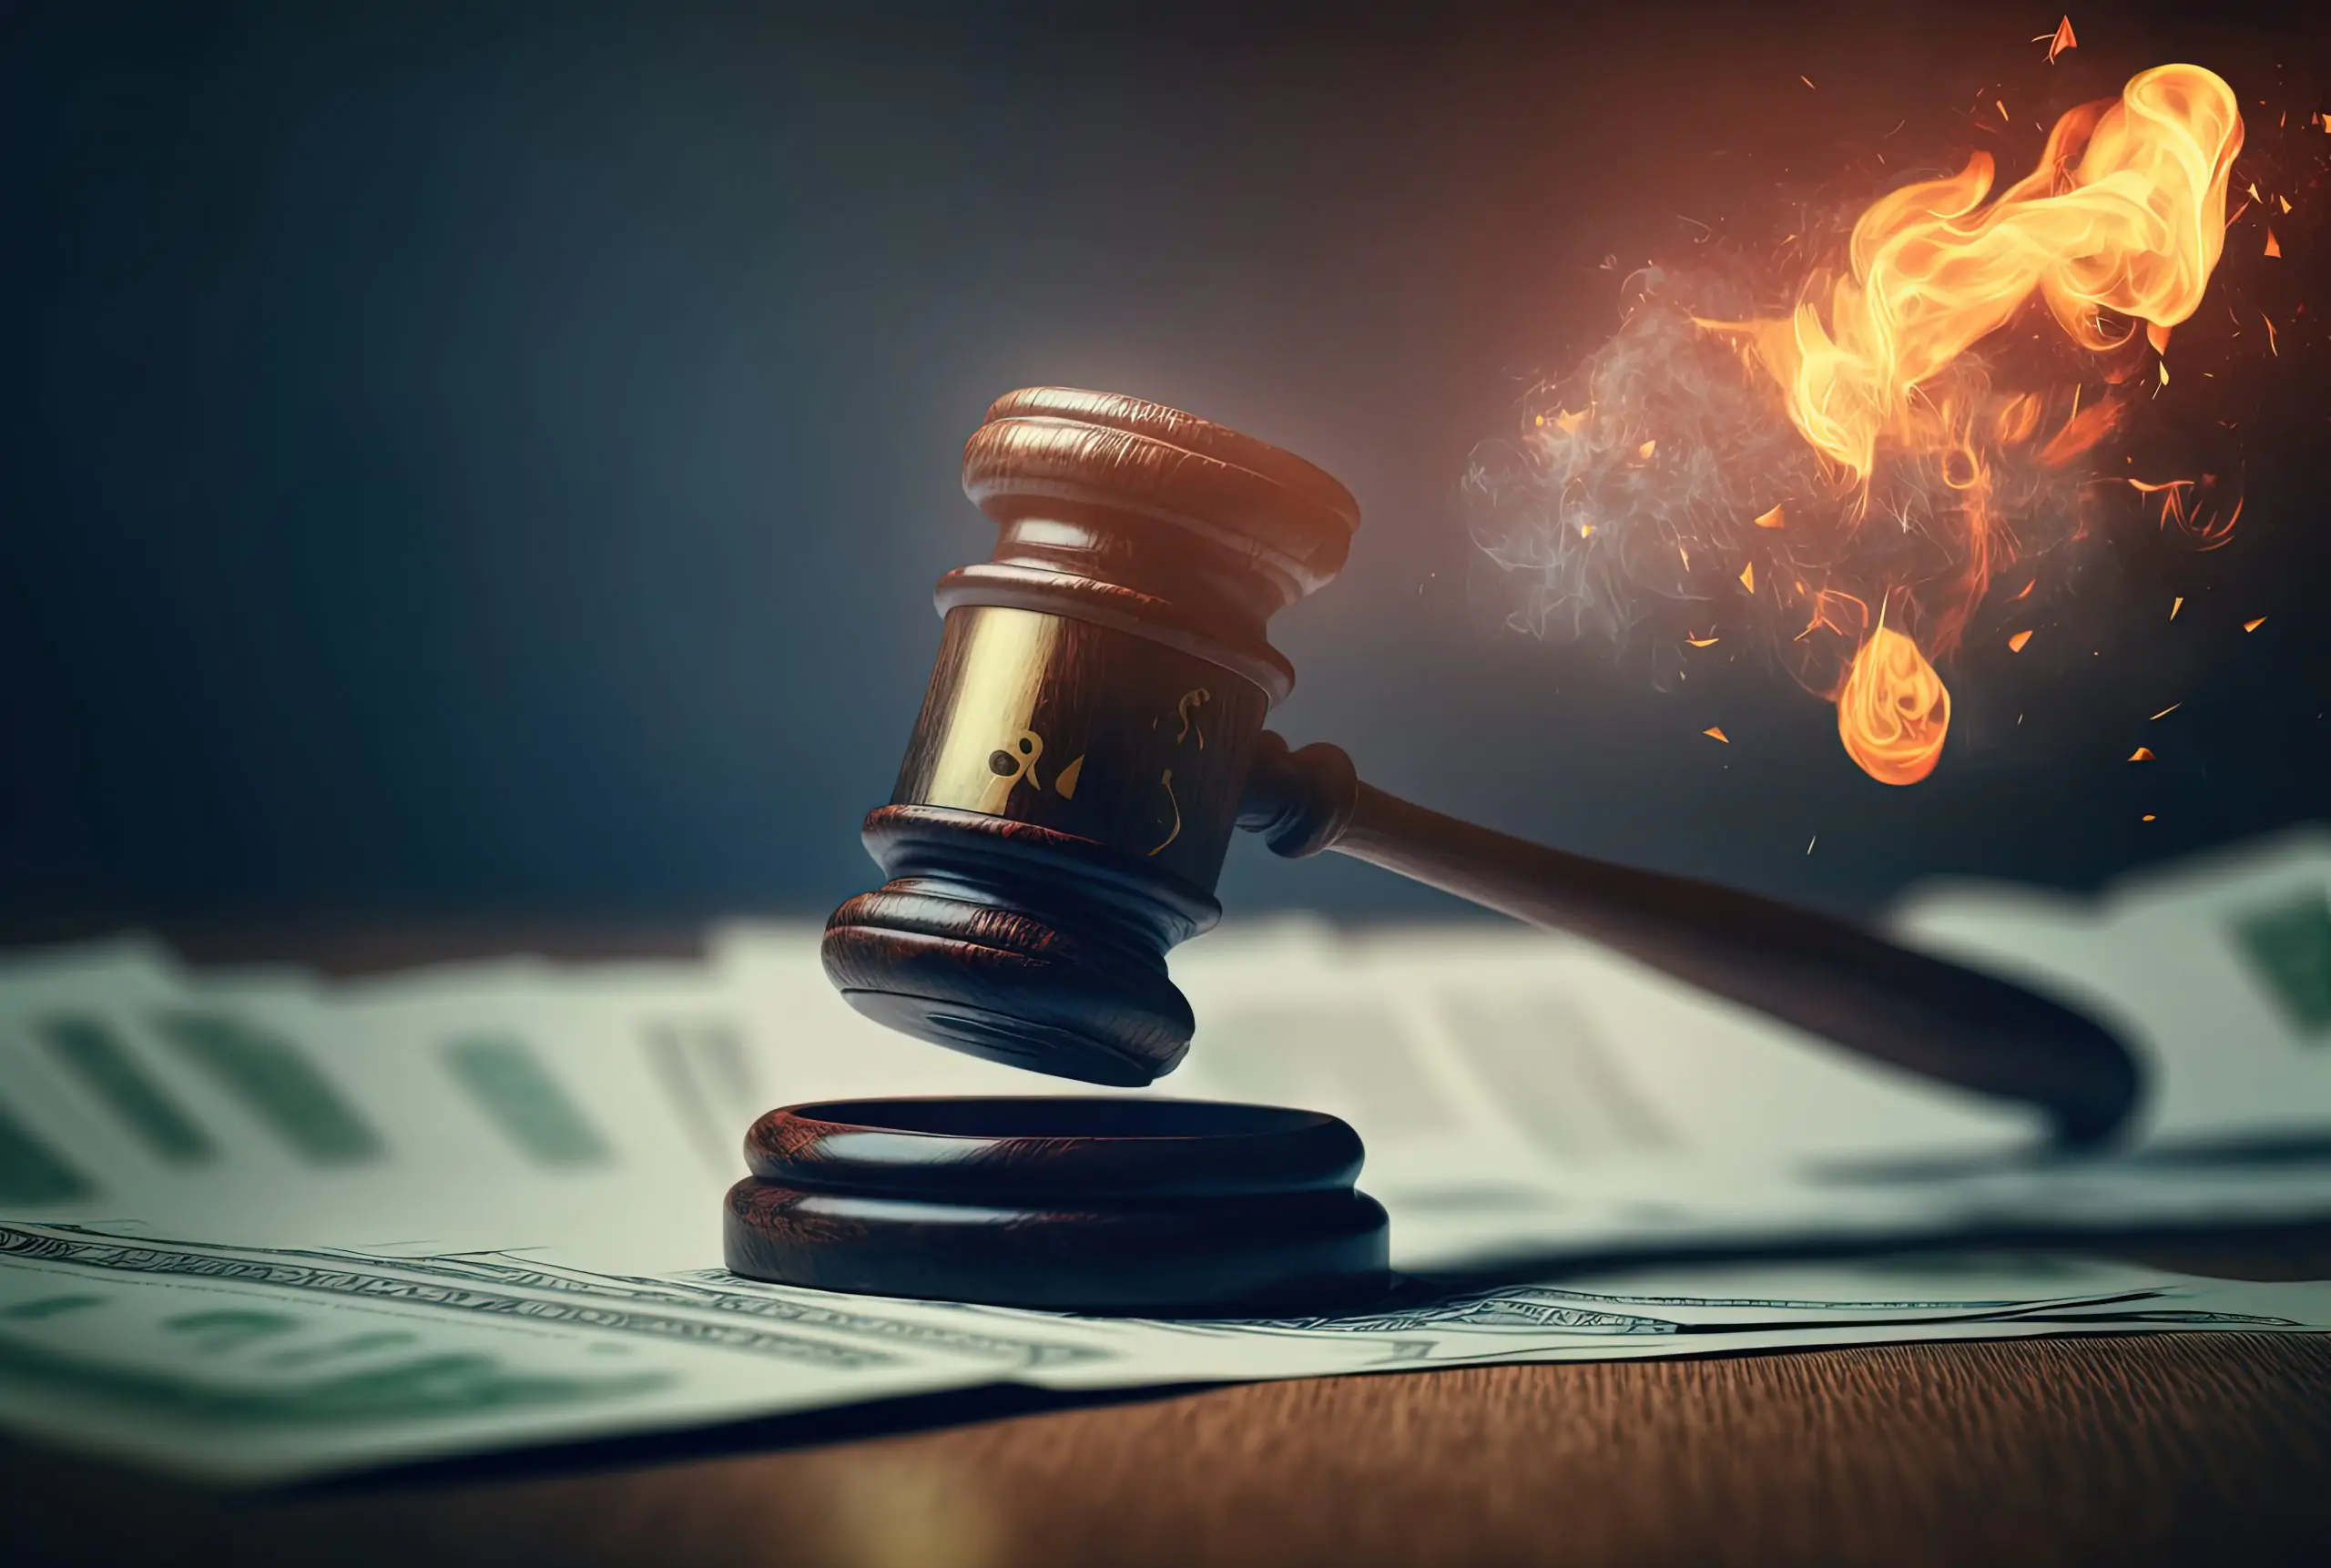 burn injury lawyers helping clients get compensation for negligence in new york